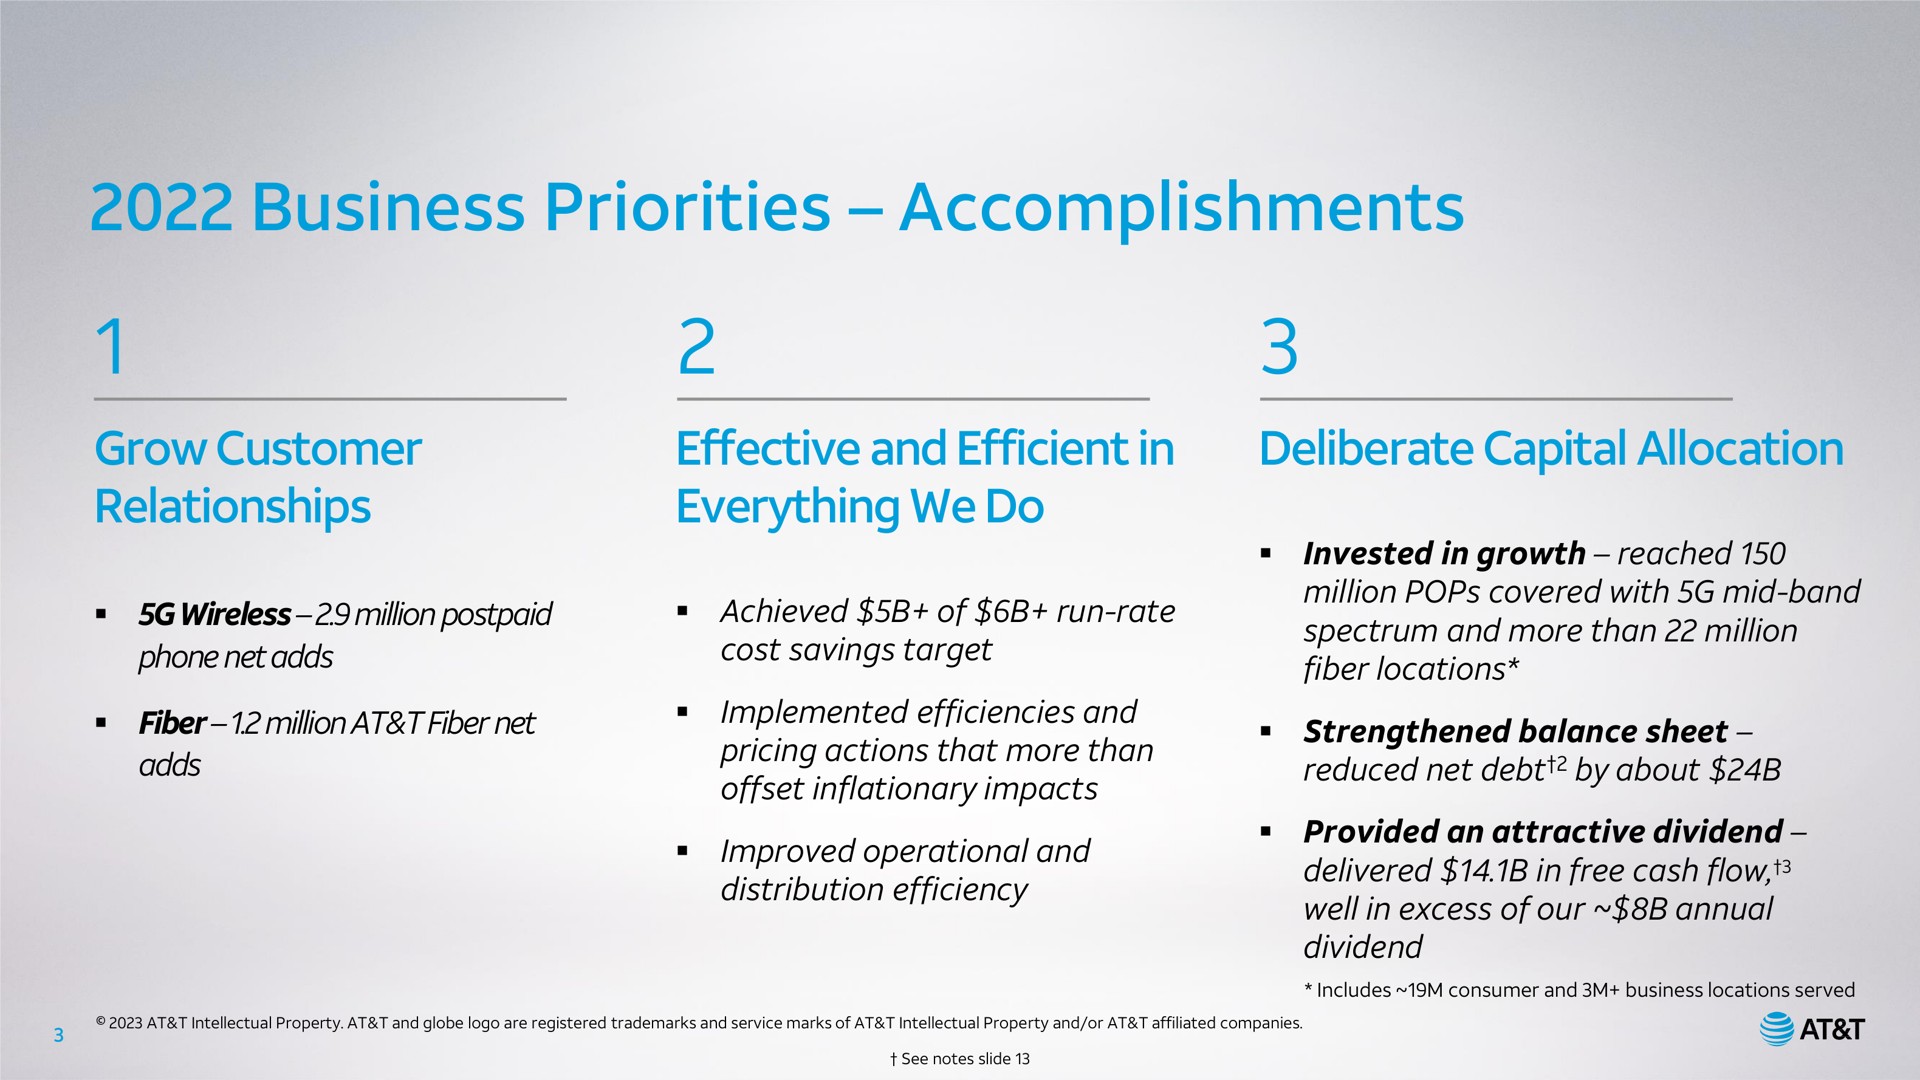 business priorities accomplishments grow customer relationships effective and efficient in everything we do wireless million postpaid achieved of run rate phone net adds cost savings target fiber million at fiber net adds implemented efficiencies and pricing actions that more than offset inflationary impacts improved operational and distribution efficiency deliberate capital allocation invested in growth reached million pops covered with mid band spectrum and more than million fiber locations strengthened balance sheet reduced net debt by about provided an attractive dividend delivered in free cash flow well in excess of our annual dividend elds me eke mull | AT&T